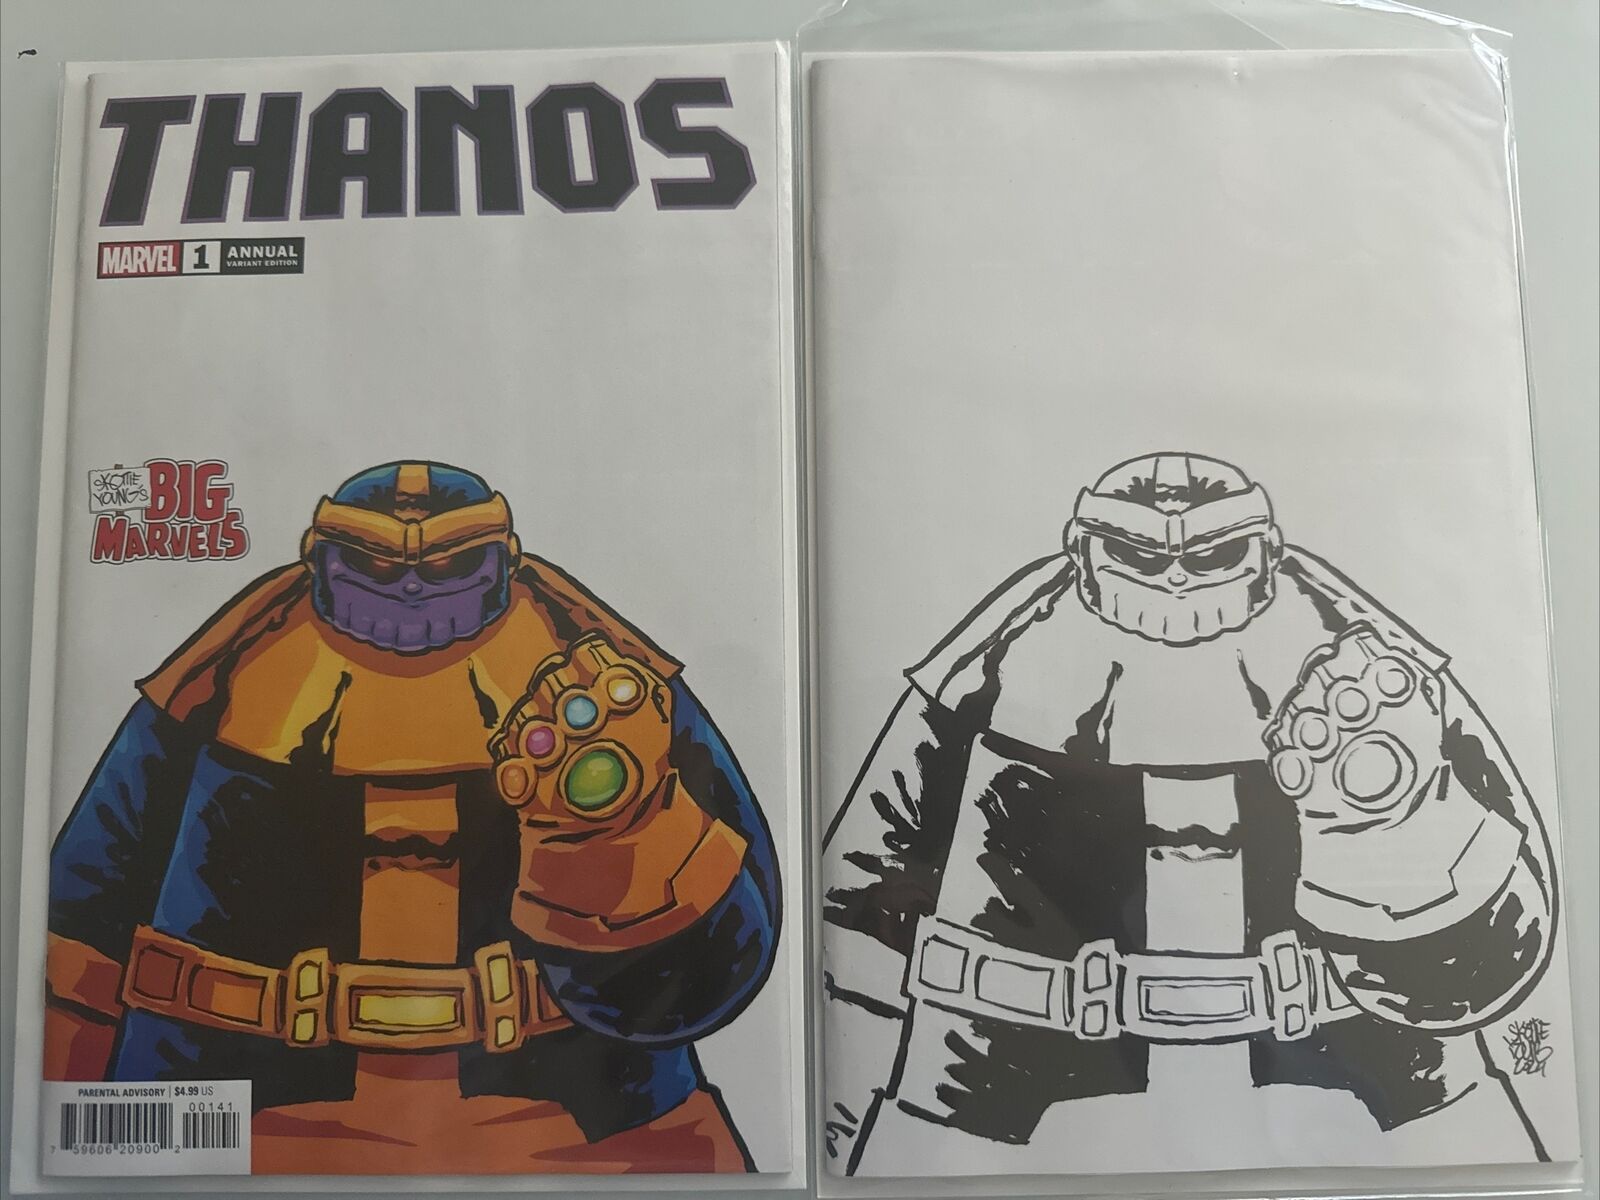 Thanos #1 Skottie Young Variant Trade And 1:50 Ratio